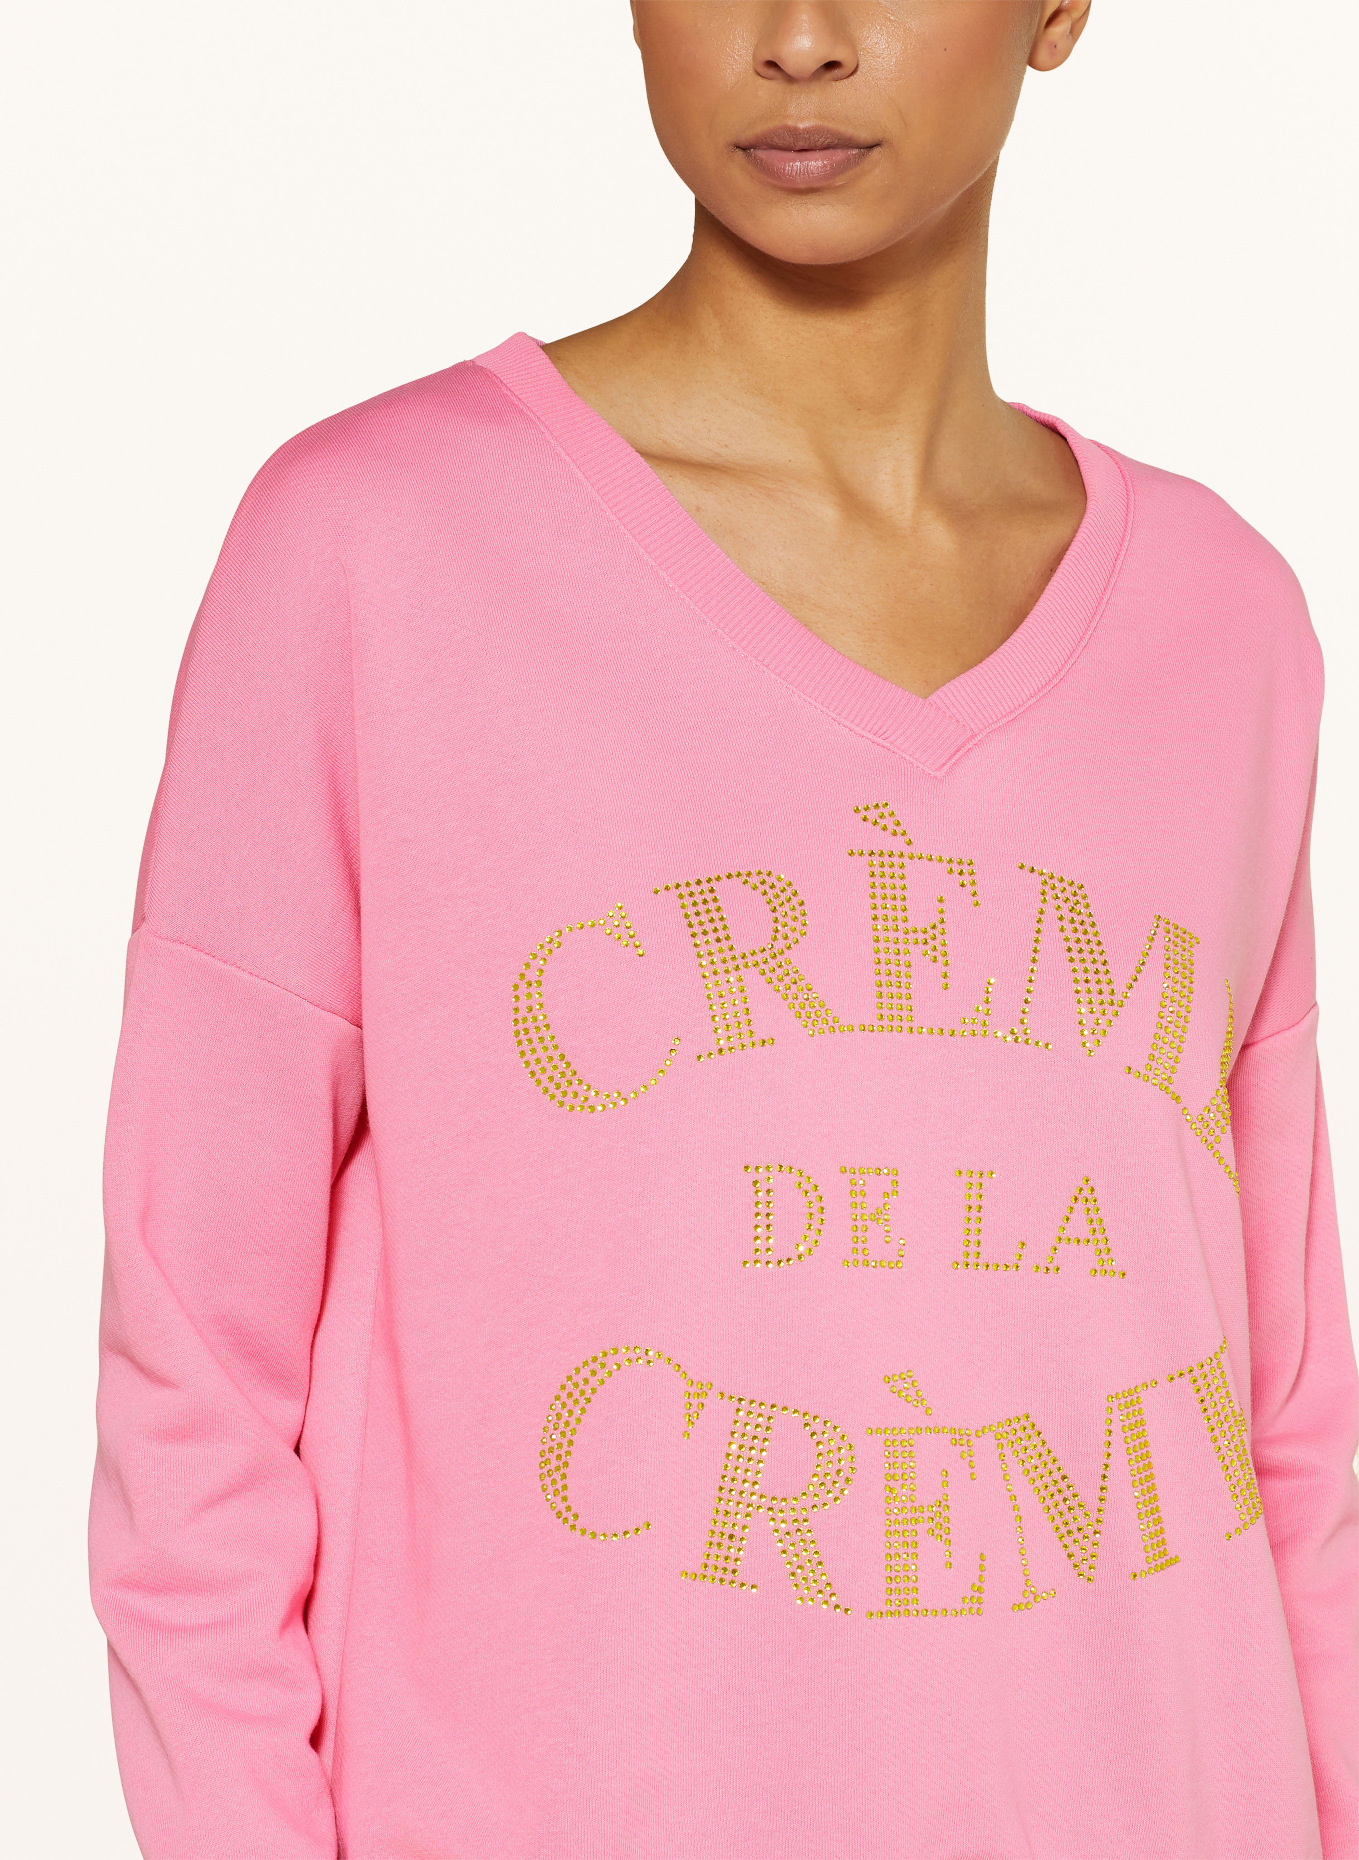 miss goodlife Sweatshirt with decorative gems, Color: PINK (Image 4)